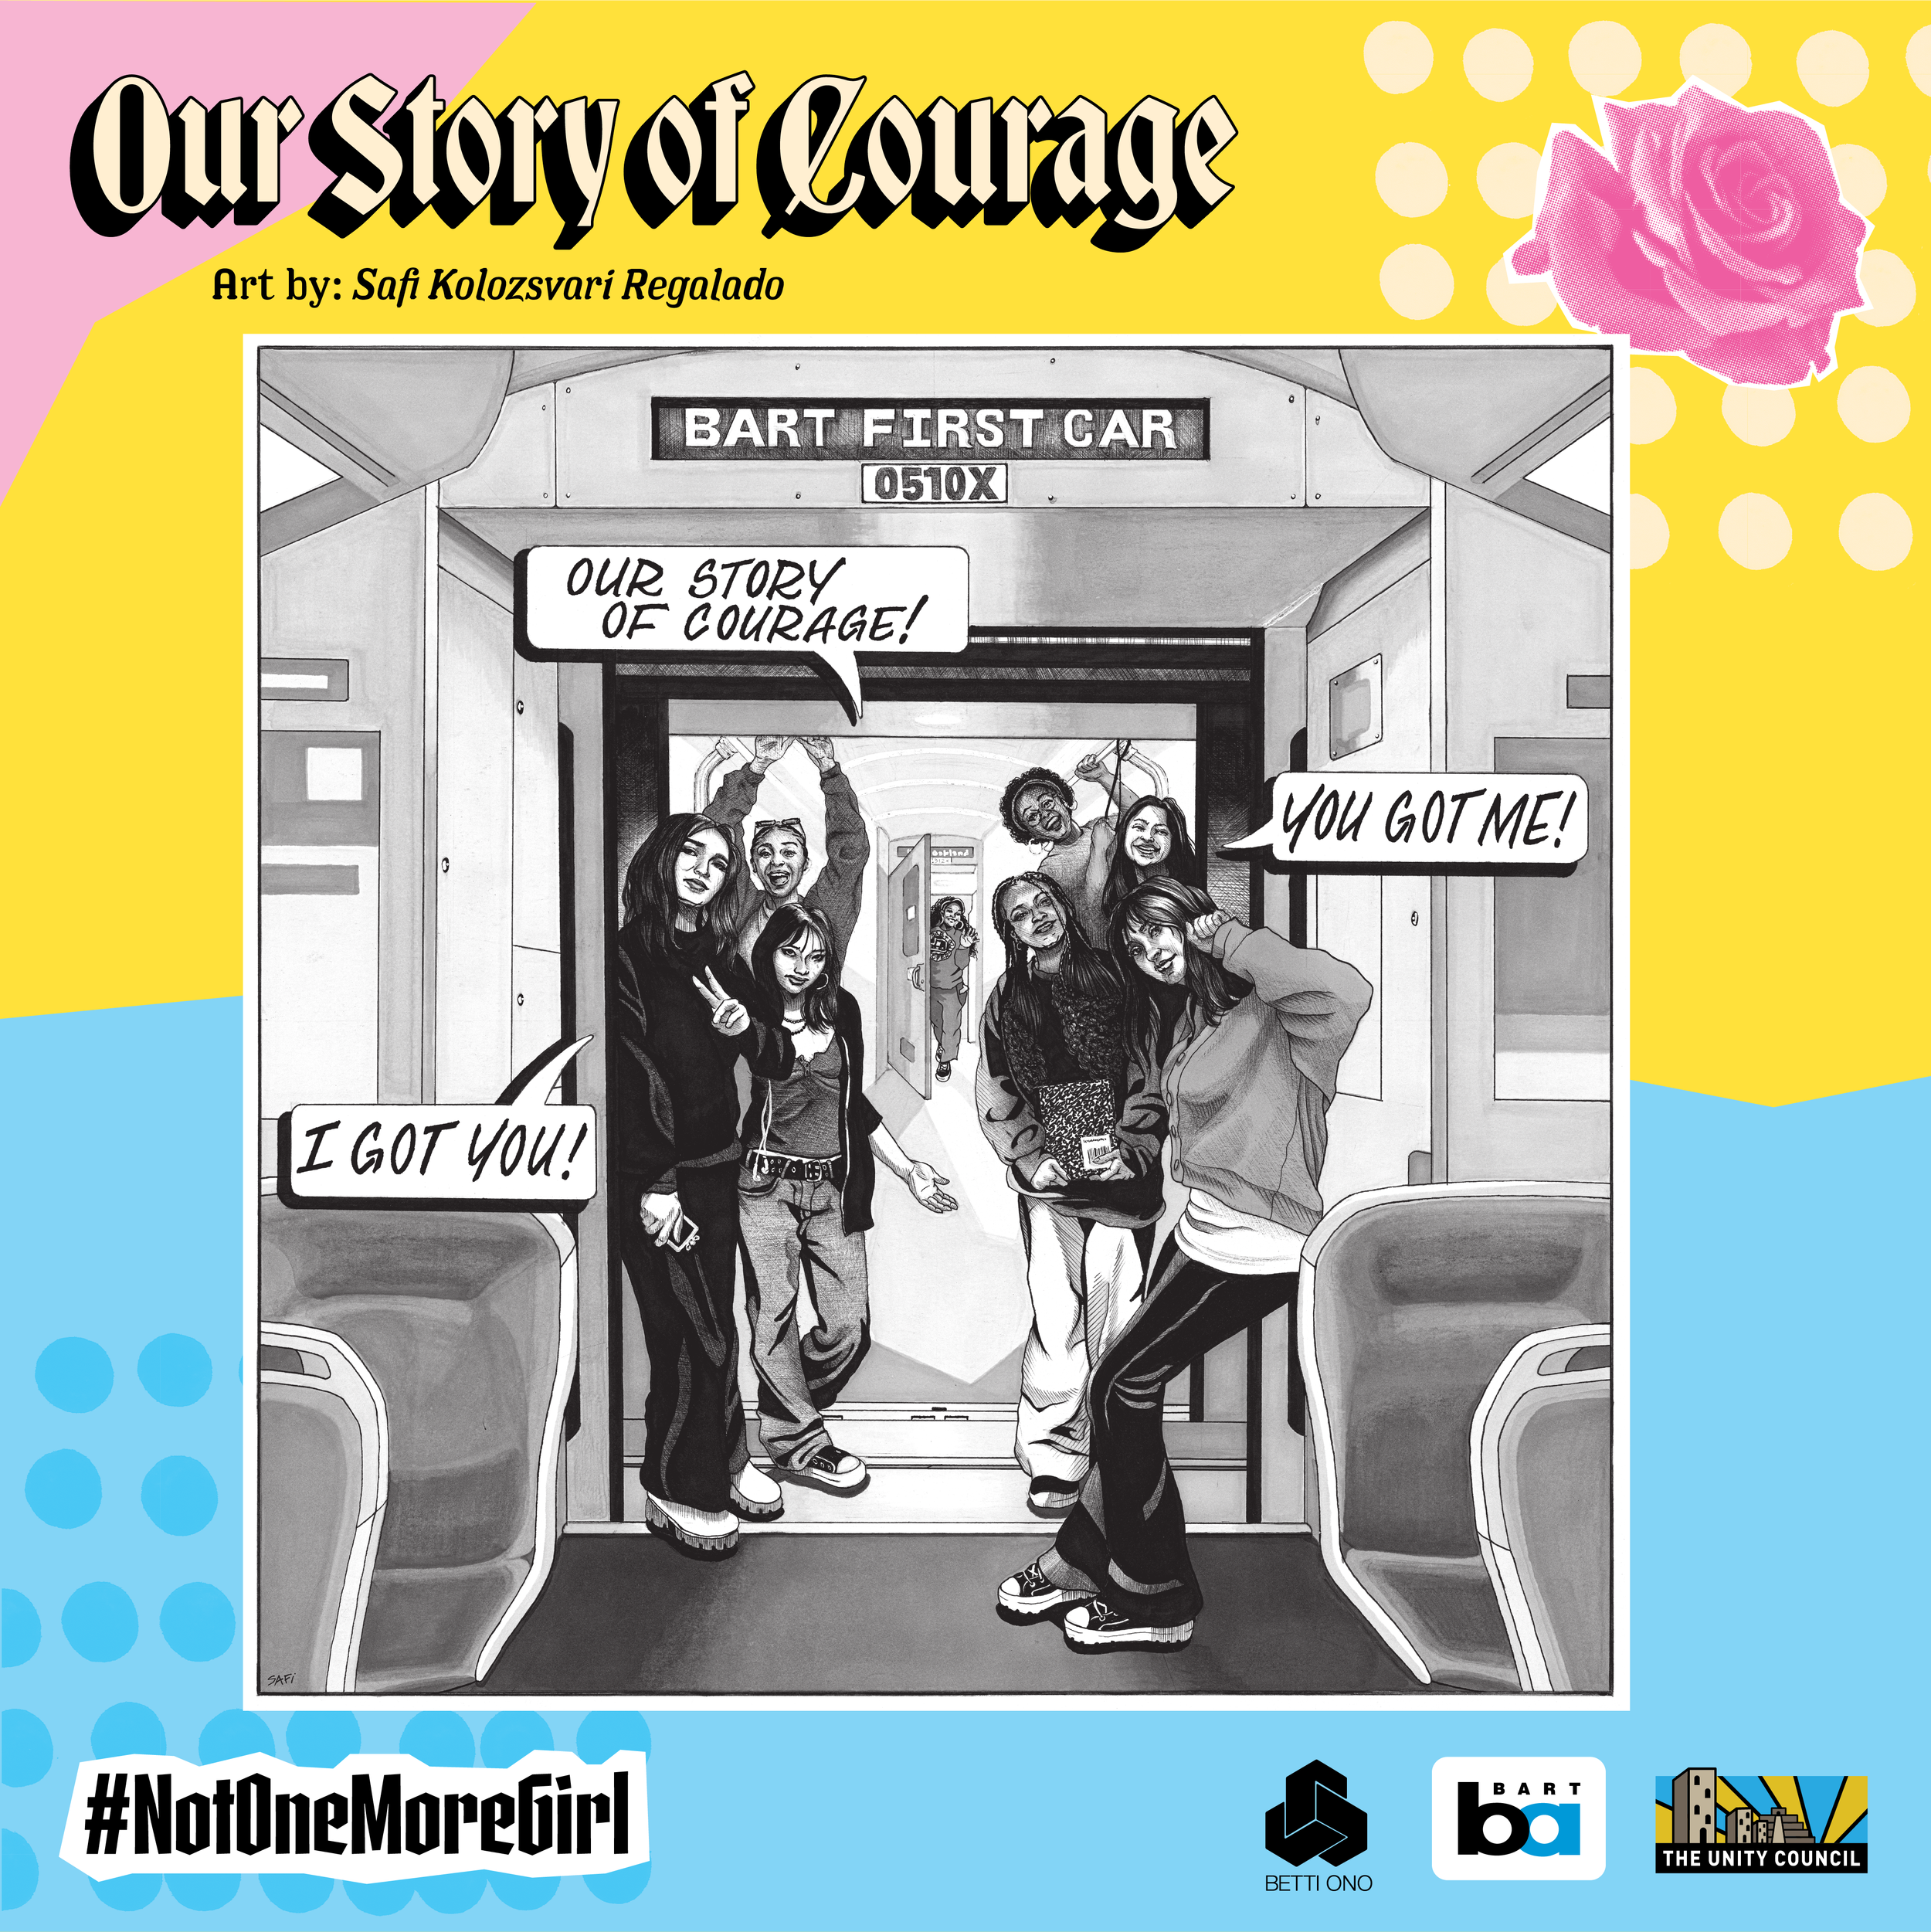  Comic for Our Story of Courage campaign. Art by Safi Kolozsvari Regalado. Comic illustrates two young women on BART. One supports the other who is being harassed on the train. The comic text bubbles reads: Our Story of Courage! You got me! I got you